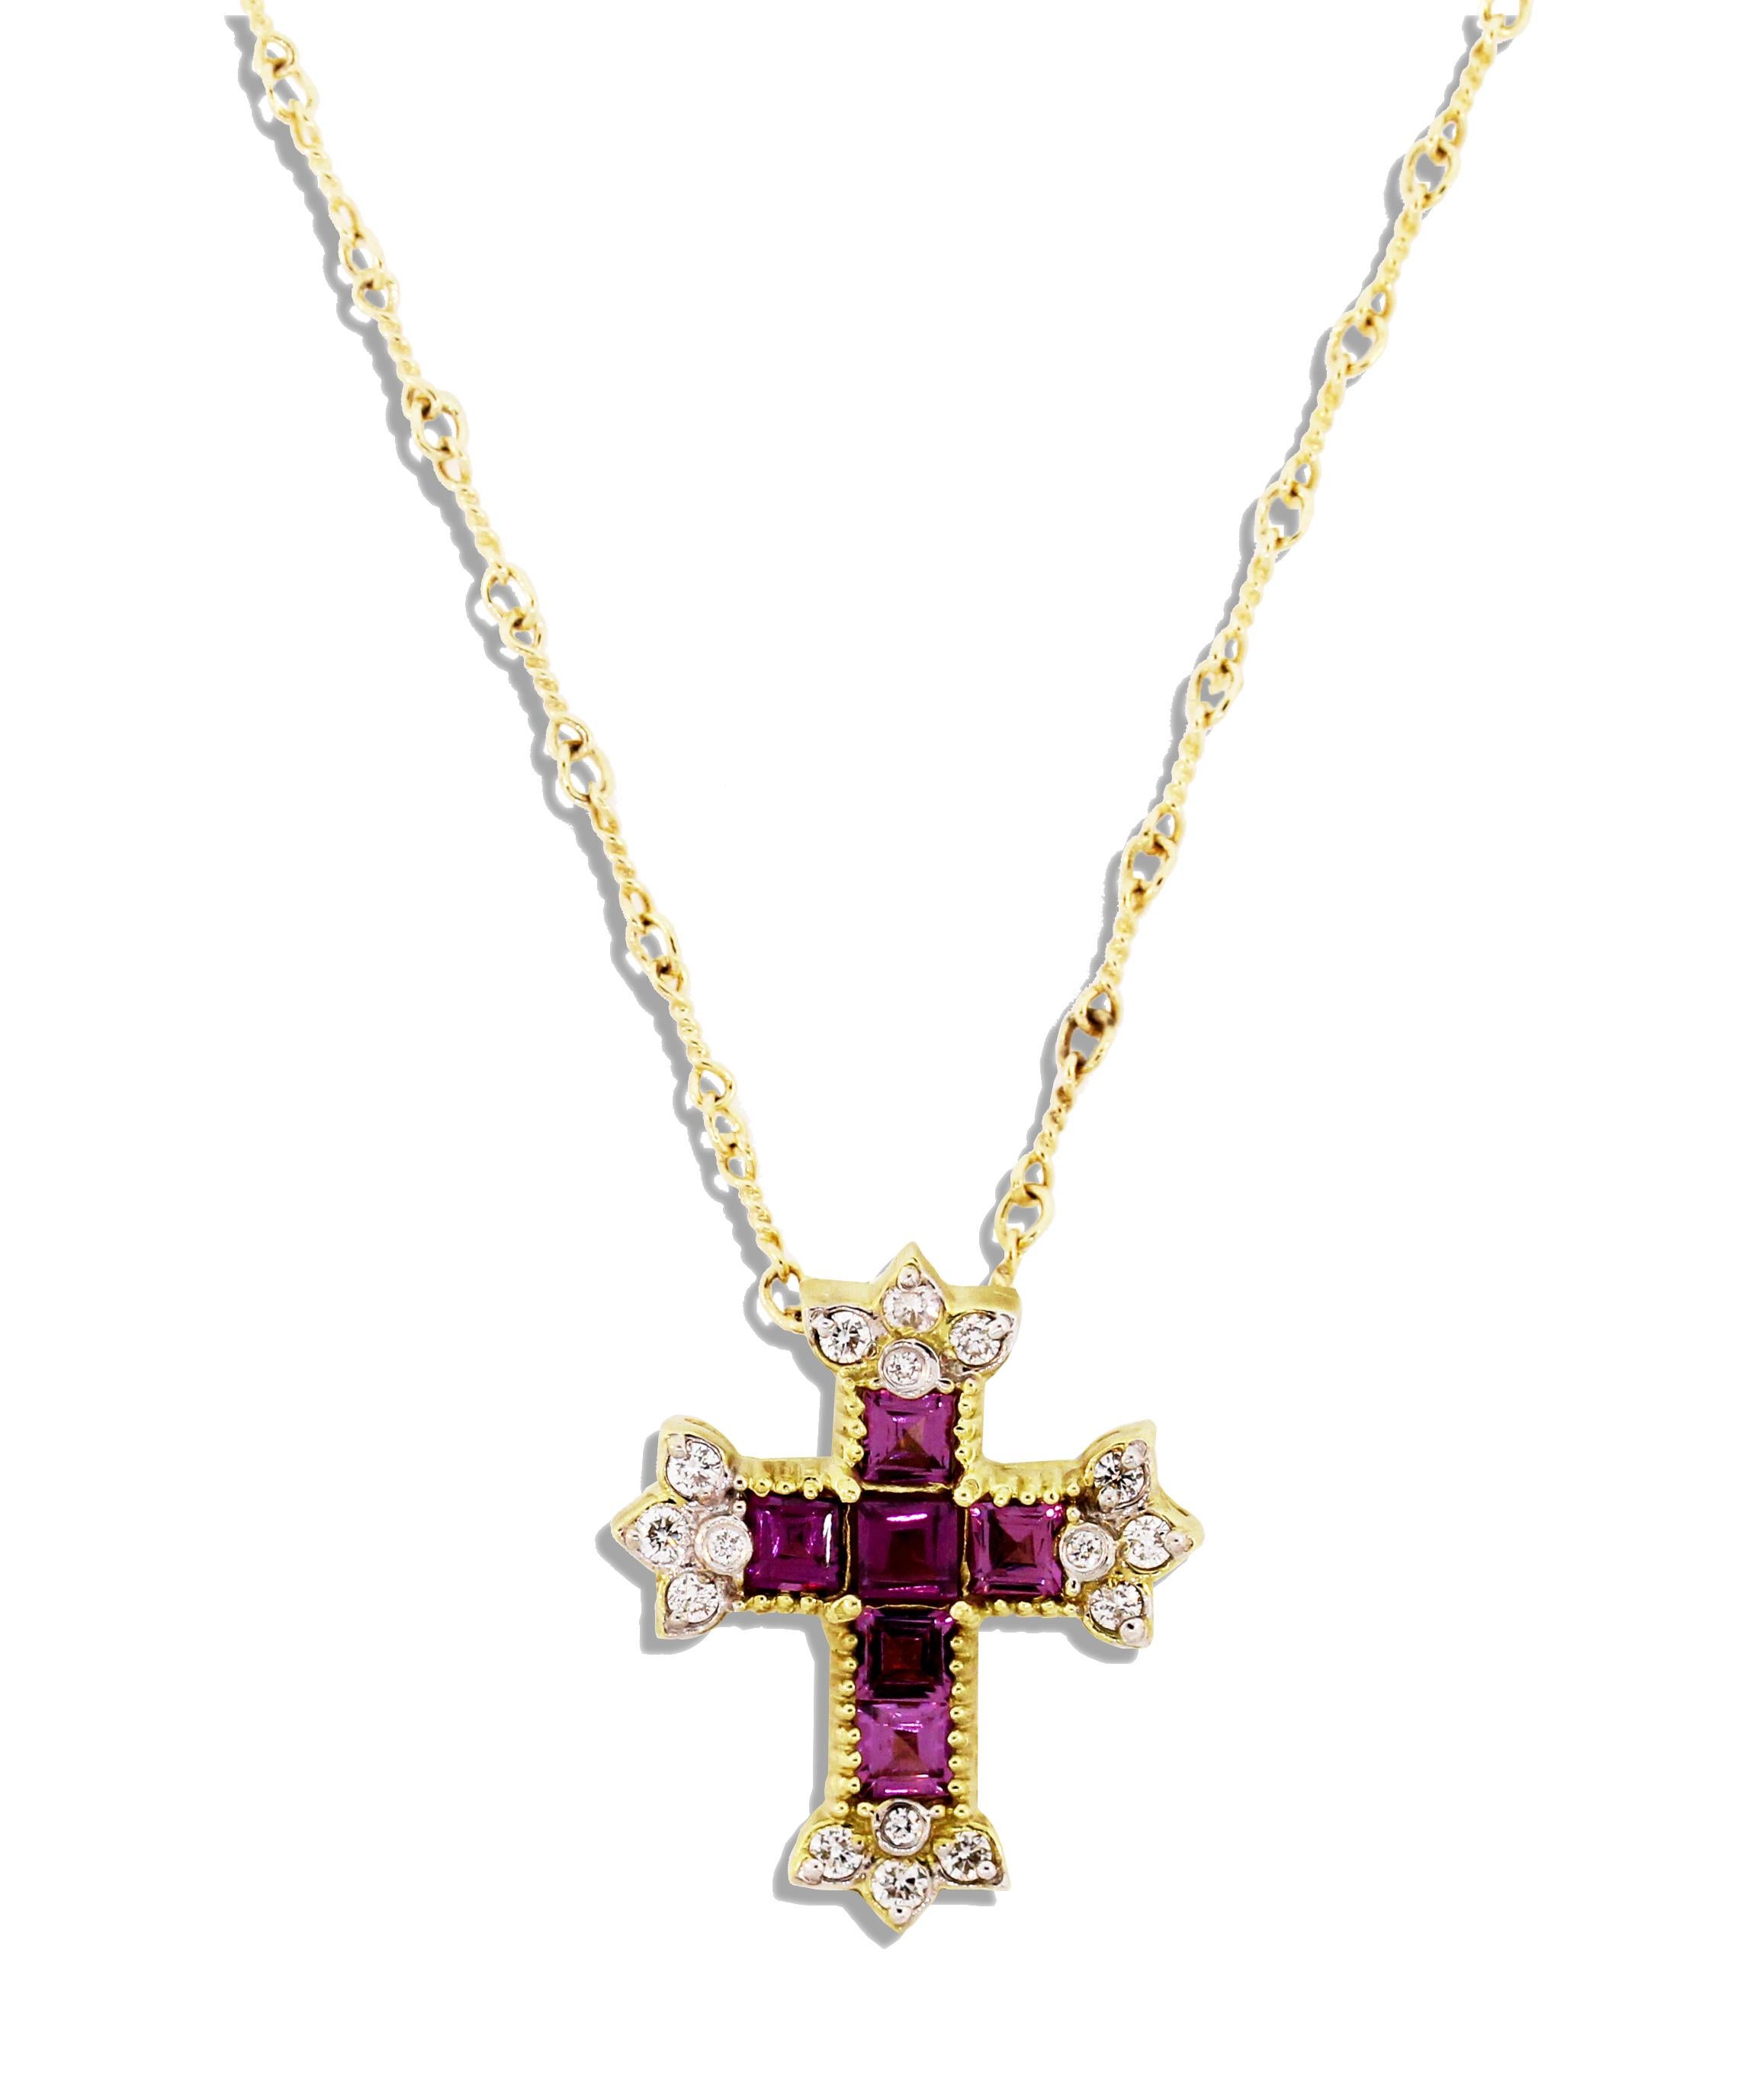 IF YOU ARE REALLY INTERESTED, CONTACT US WITH ANY REASONABLE OFFER. WE WILL TRY OUR BEST TO MAKE YOU HAPPY!

18K Yellow Gold and Diamond Cross Pendant with Magenta Garnet and Diamonds by Stambolian

Six Princess-cut Magenta Garnets and Diamonds make